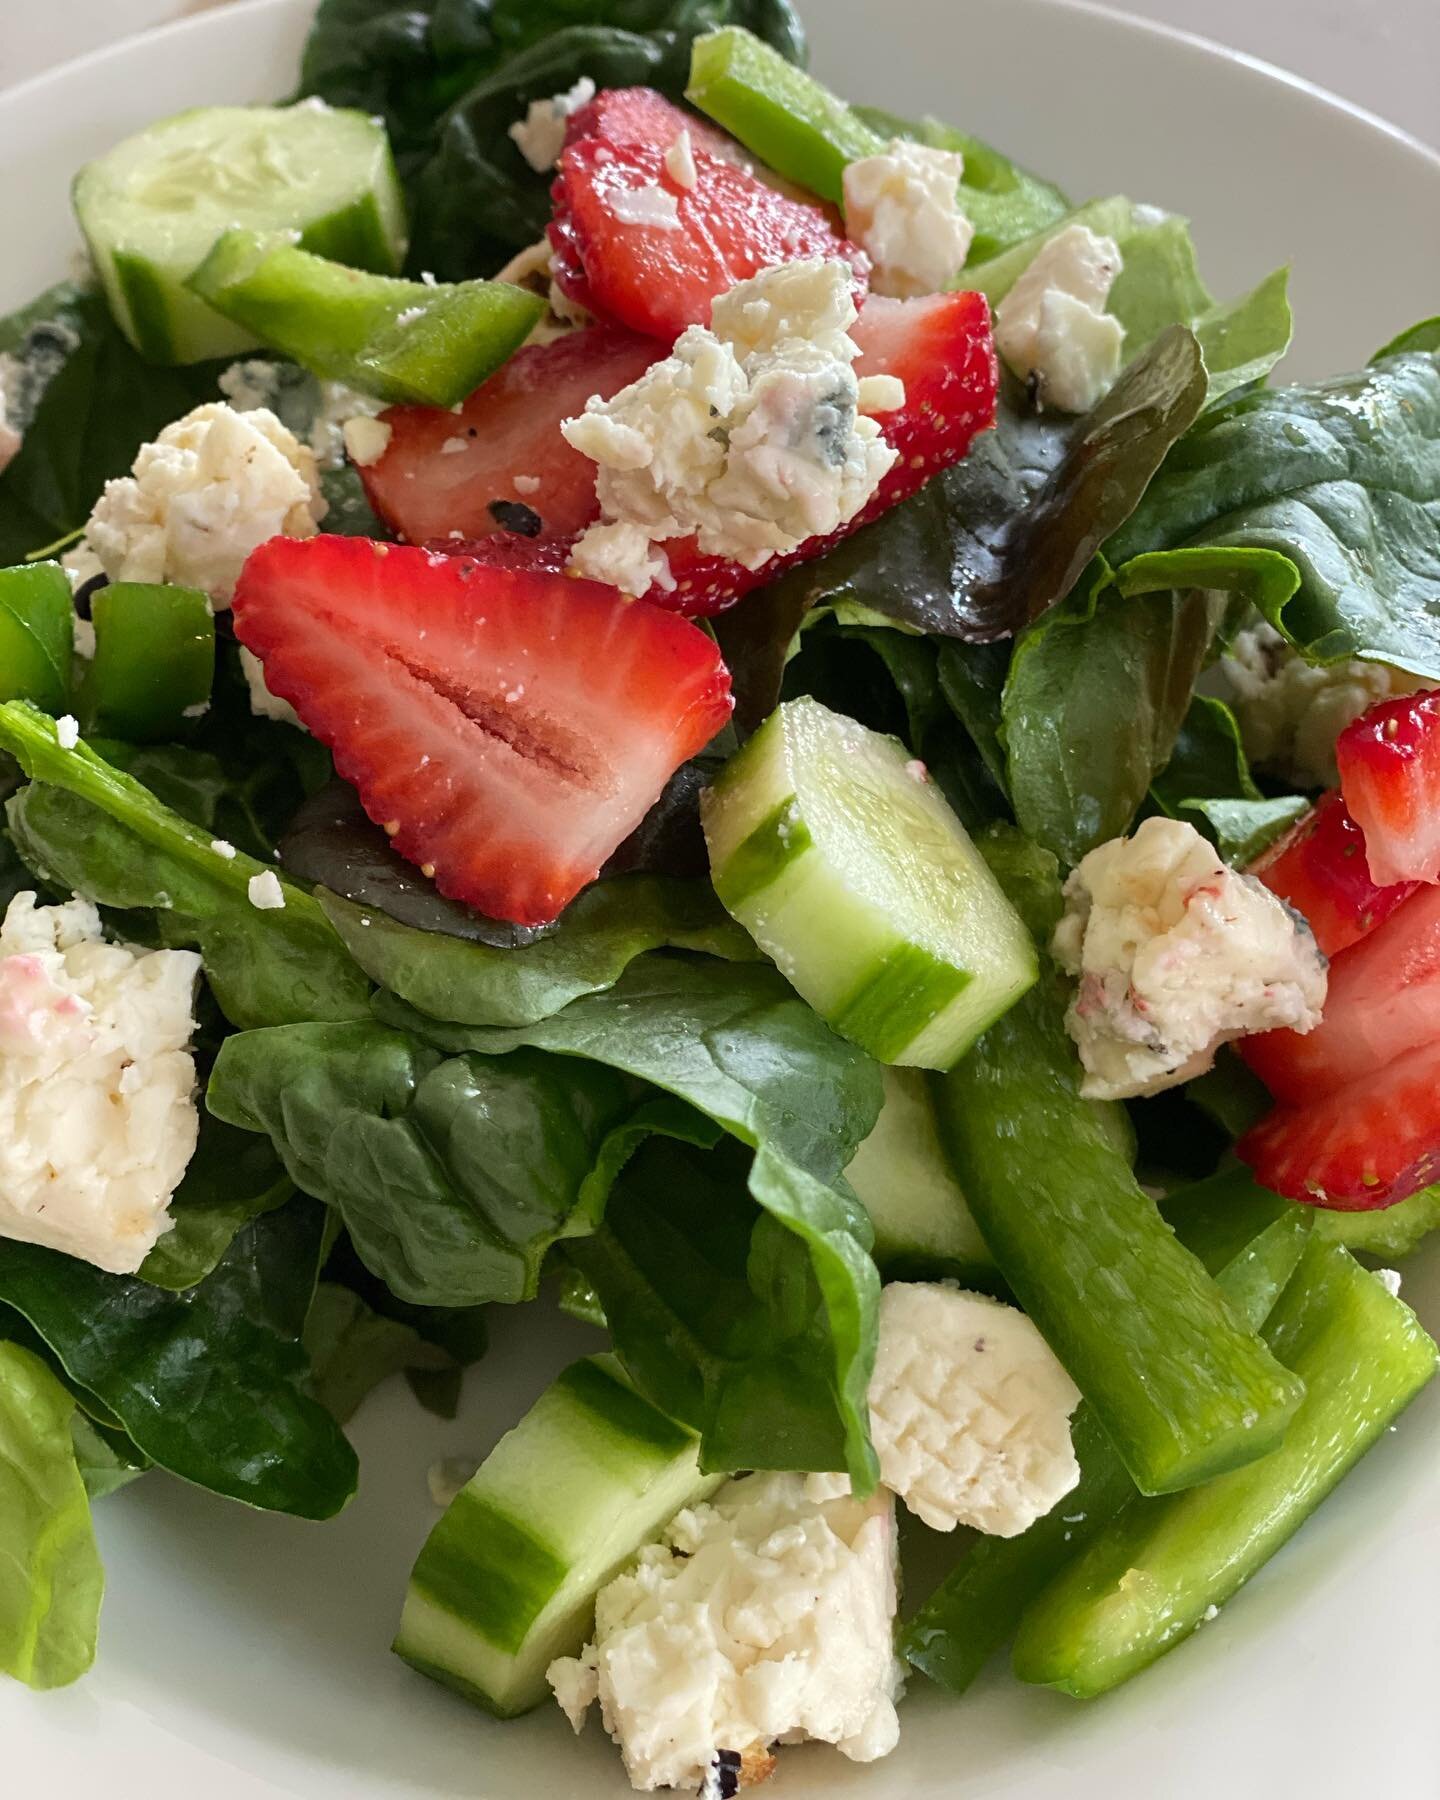 Ideas for the weekend. Local spinach salad with blue cheese. So delicious! #cheese #salad #memorialday #party #eatgoodfood #eatgoodfeelgood #summervibes #spinach #strawberries #bluecheese #goodfood #shoplocal #shopsmallbusiness #treatyourself